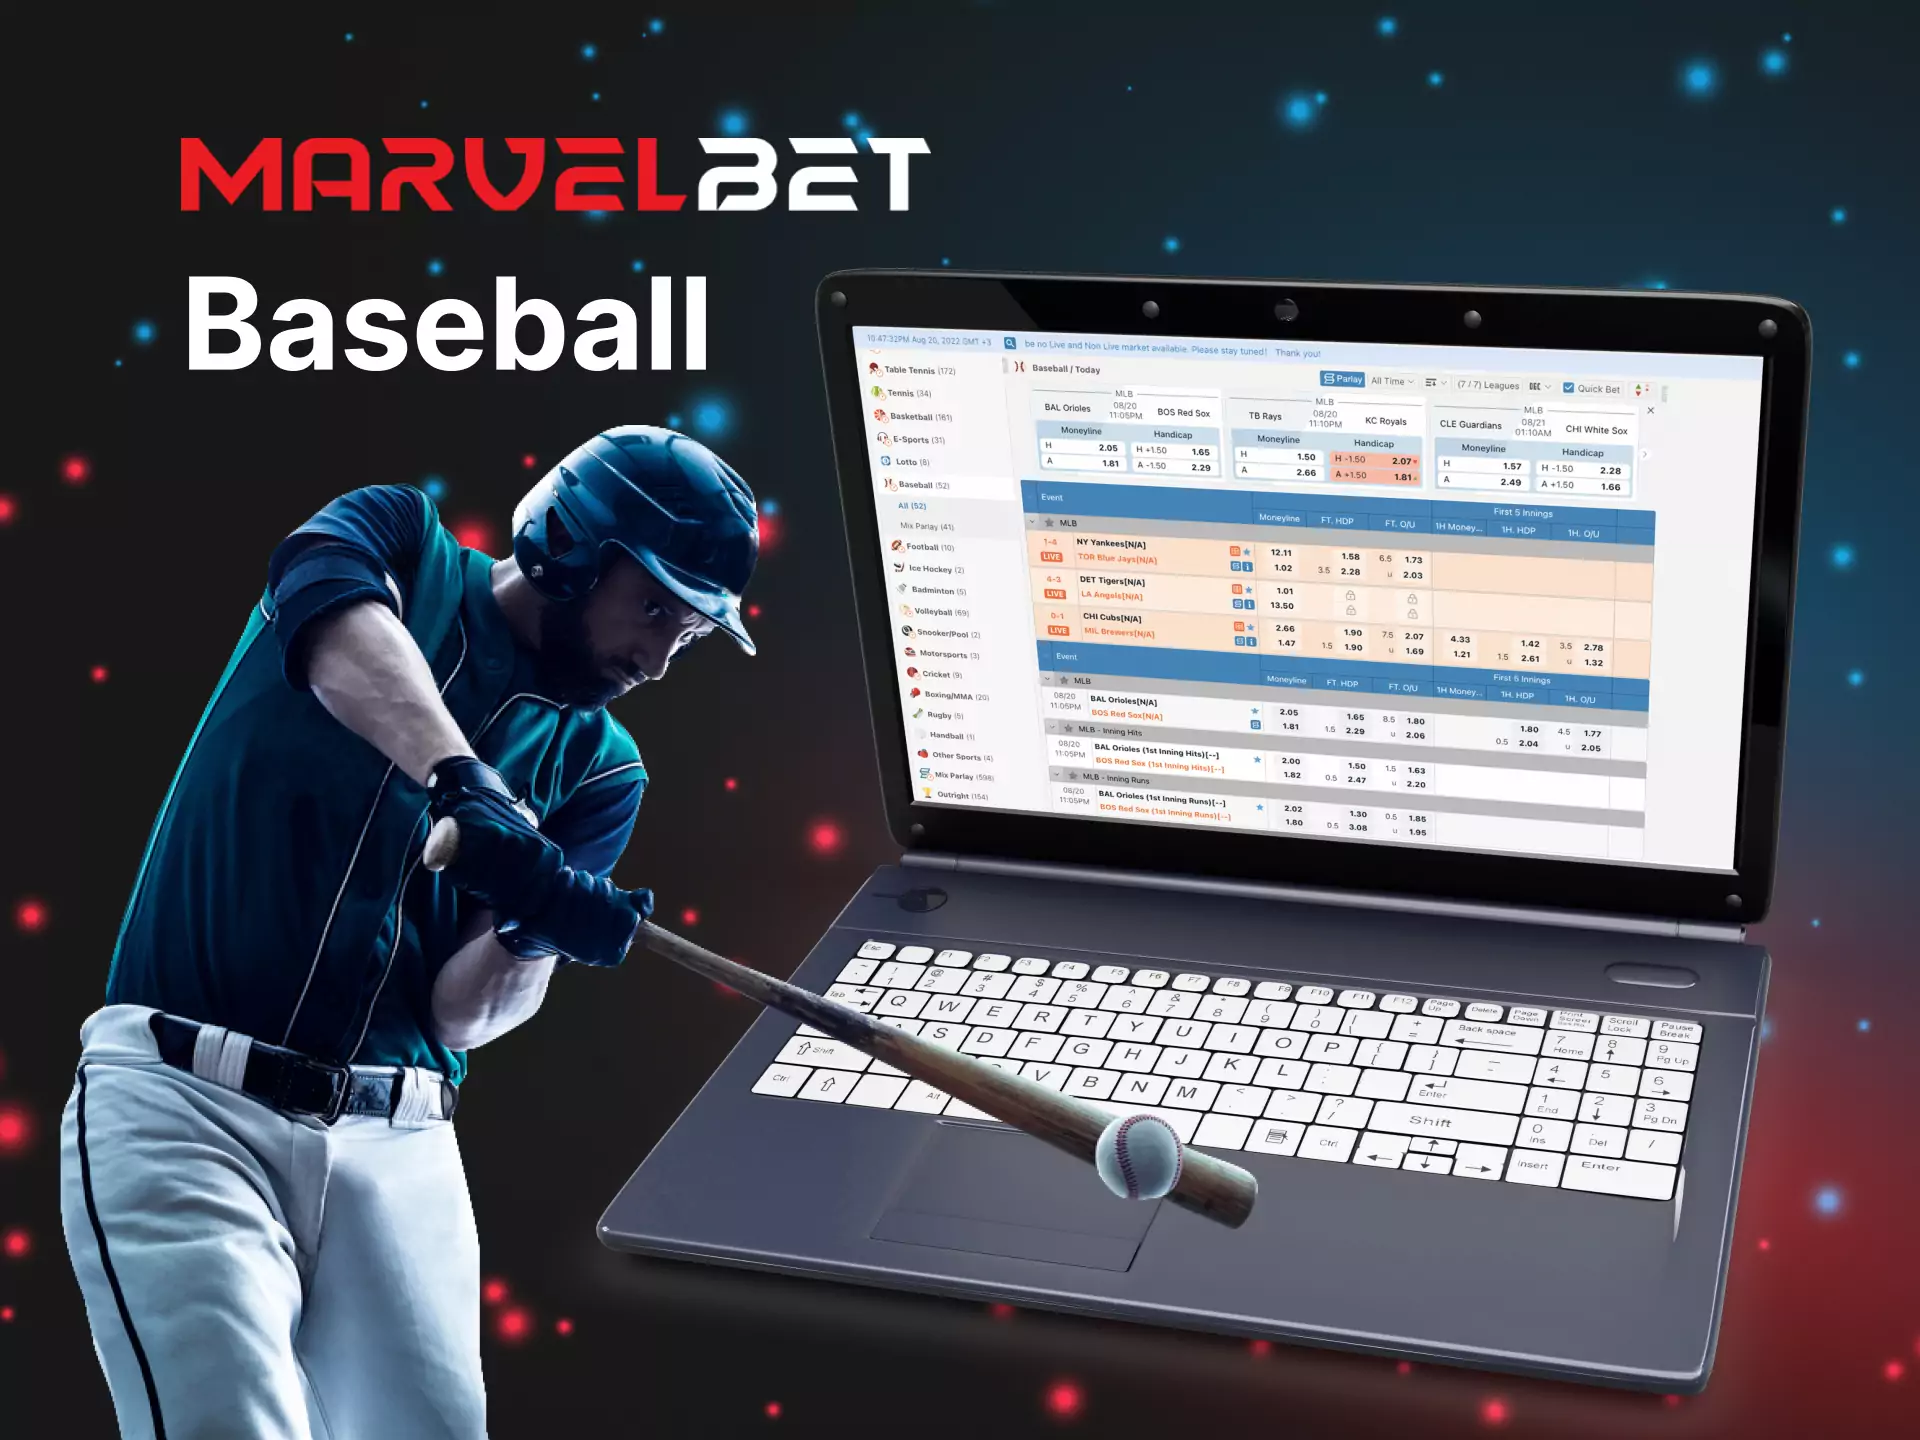 You can place bets on baseball matches on Marvelbet.